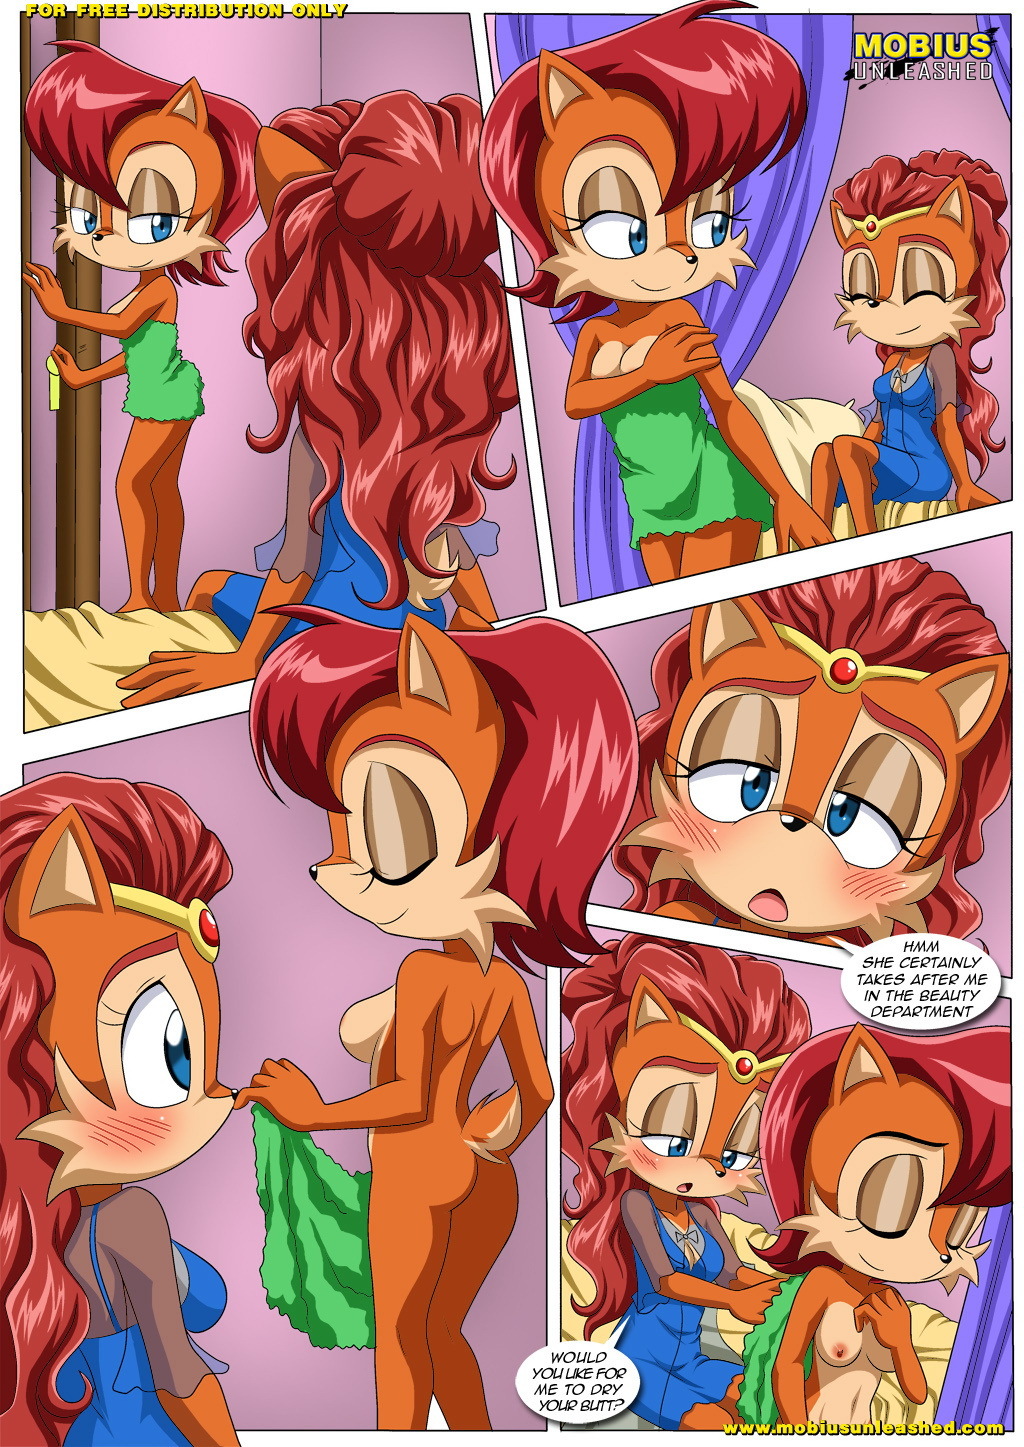 A Helping Hand - Page 5